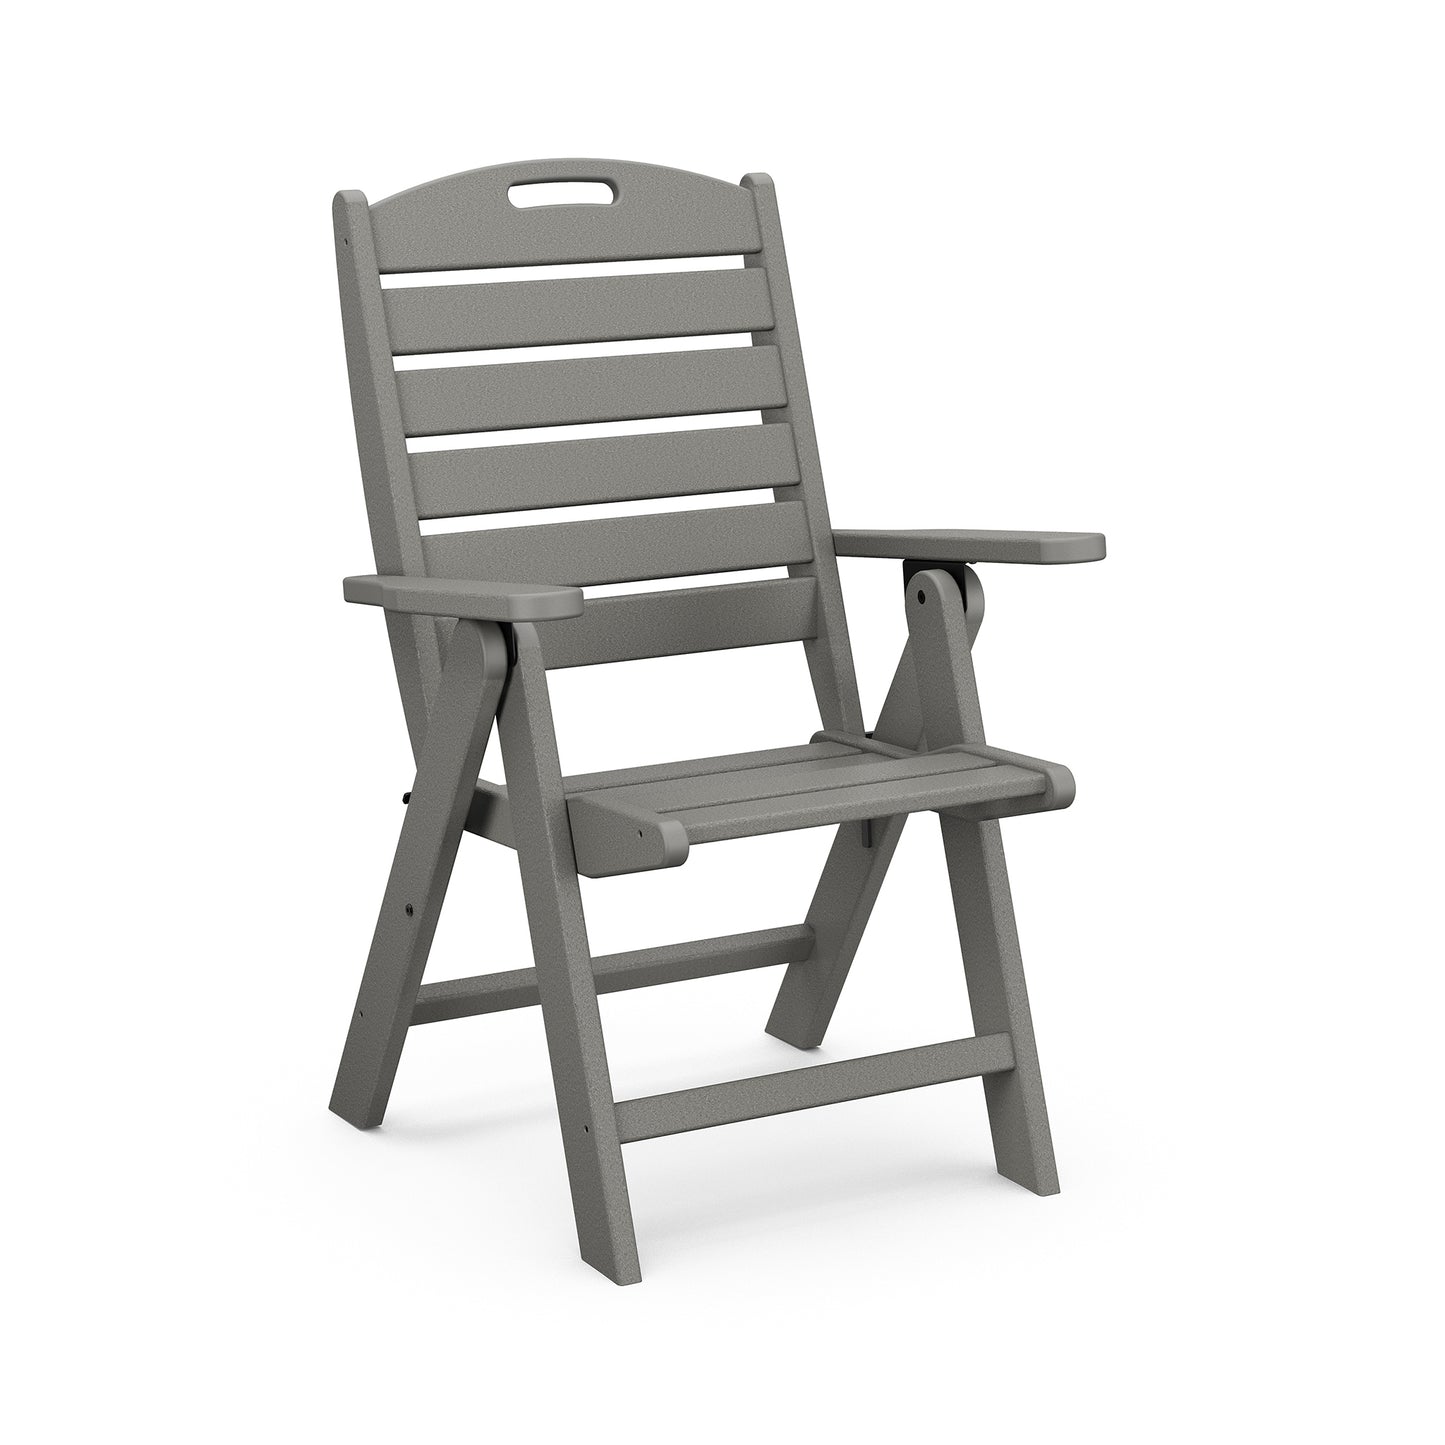 A gray POLYWOOD® Nautical Highback Folding Dining Chair with armrests, isolated on a white background. The chair is in an upright position showing its sturdy design and portability features.